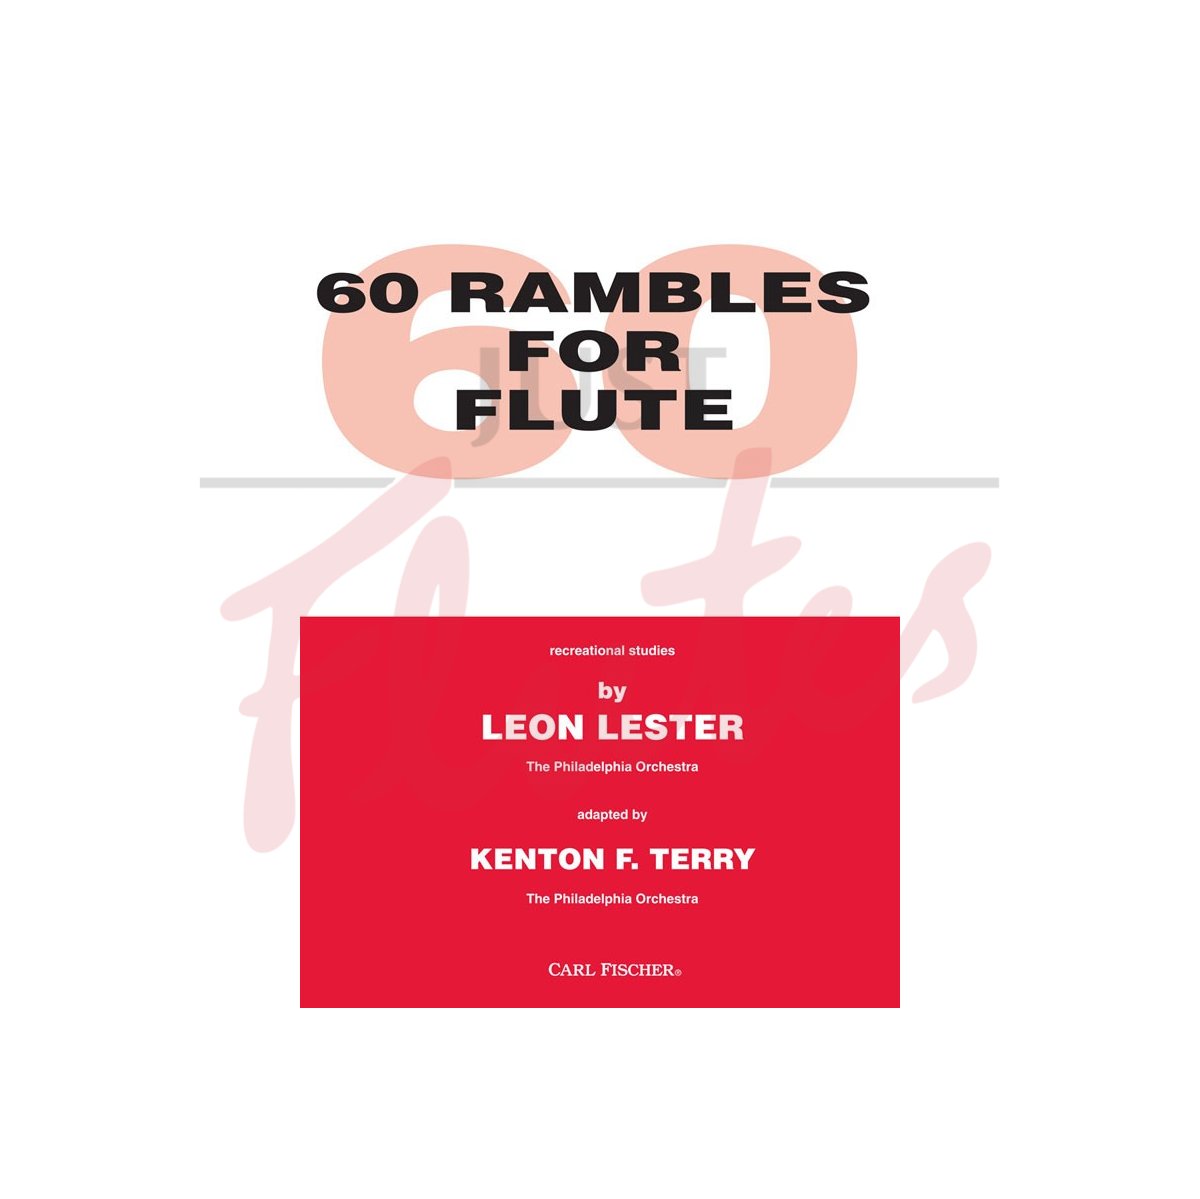 60 Rambles for Flute